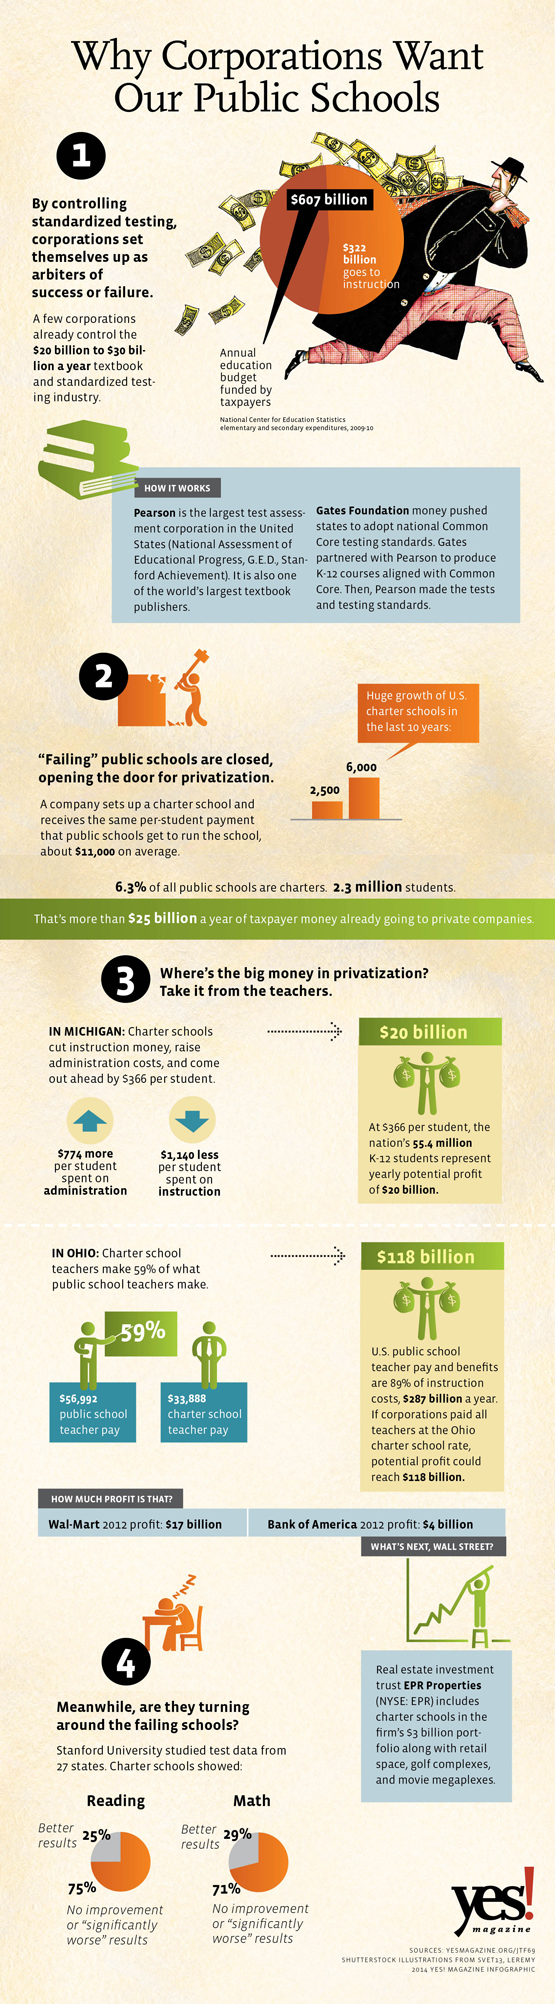 Why Corporations Want Our Public Schools